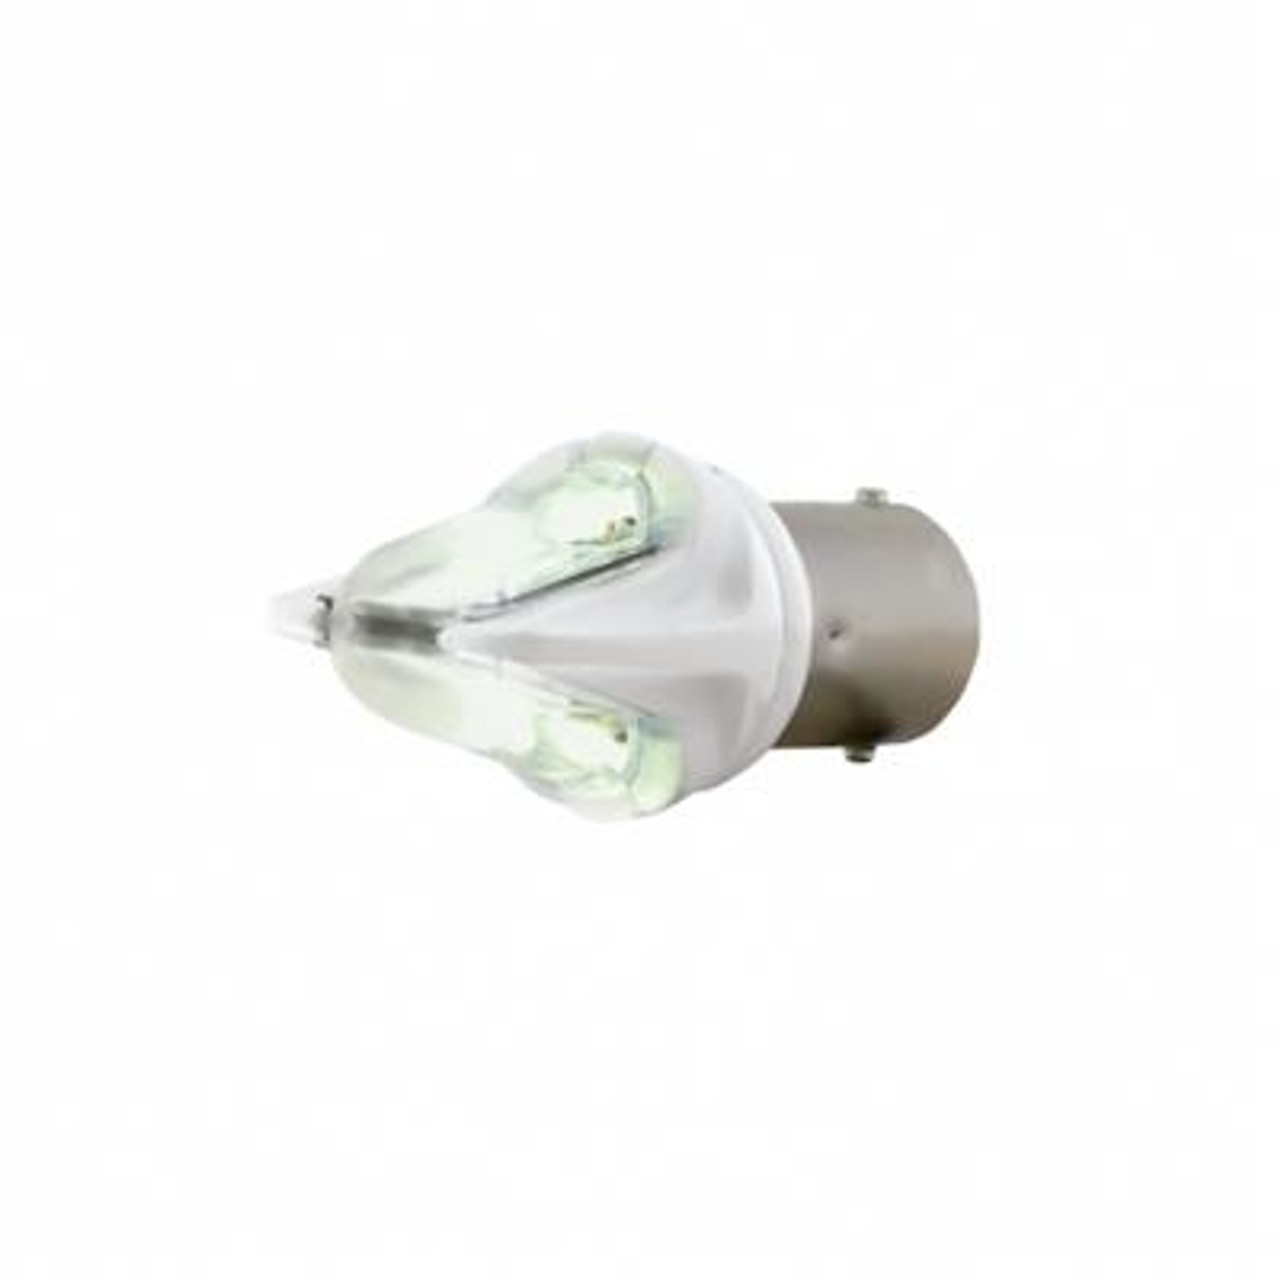 We offer a wide range of light bulbs from incandescent turn signal bulbs, LED headlight bulbs, LED dome nights, to halogen headlight bulbs. And if you wanted to add some flavor, we also sell light bulb covers in a variety of colors!